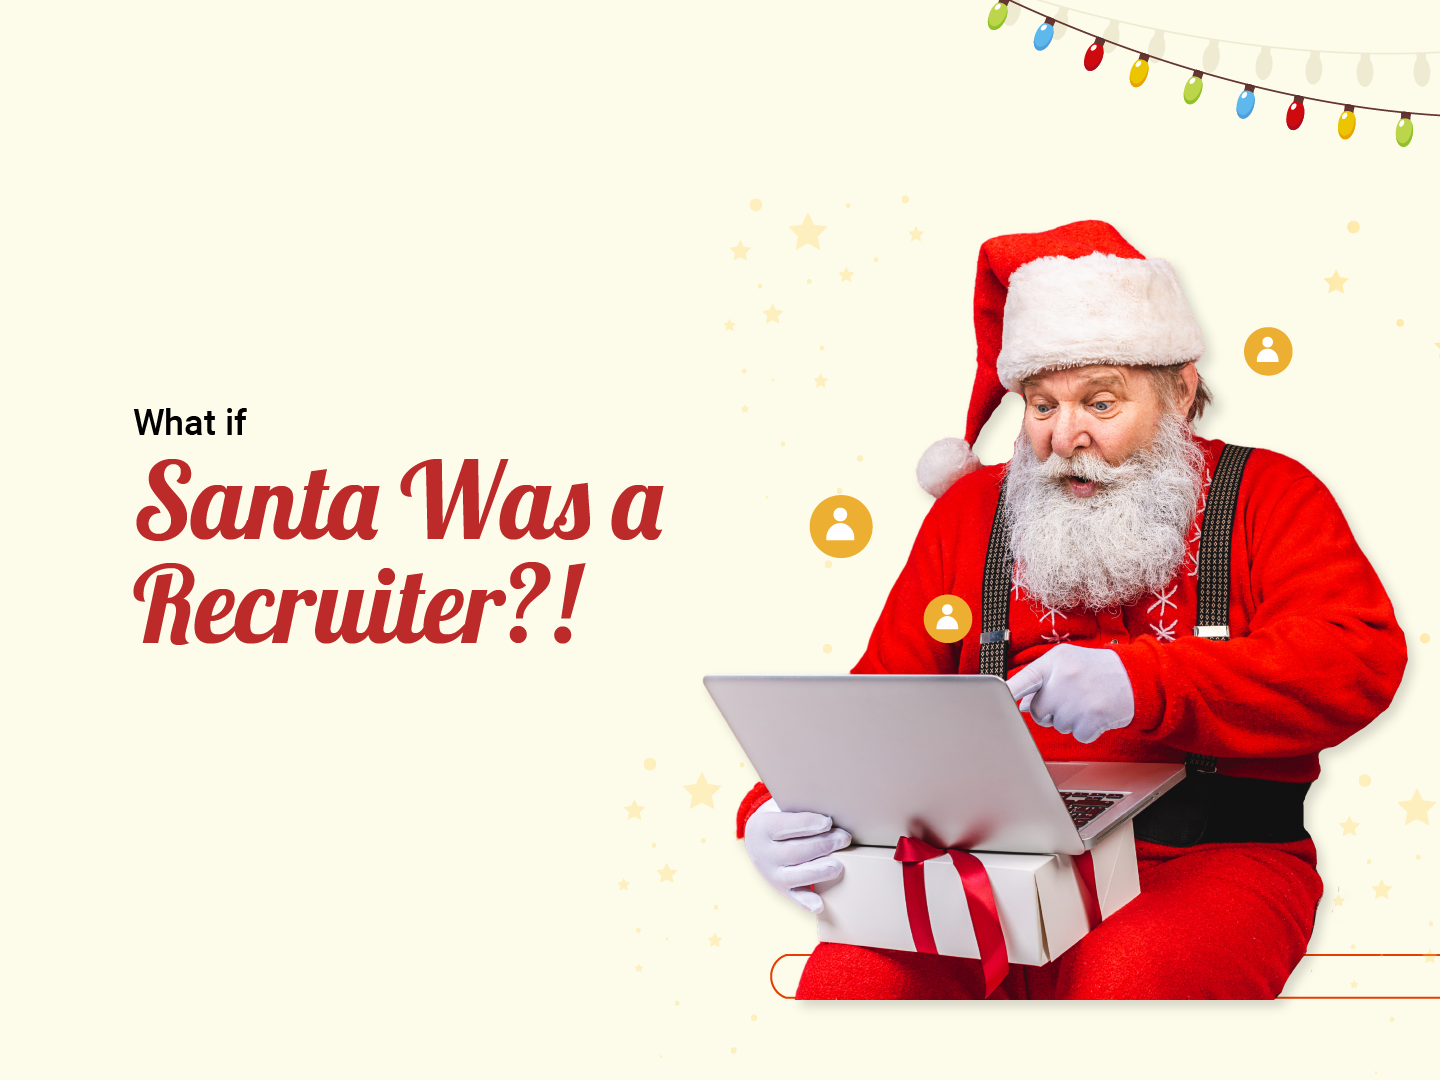 If Santa Was a Recruiter